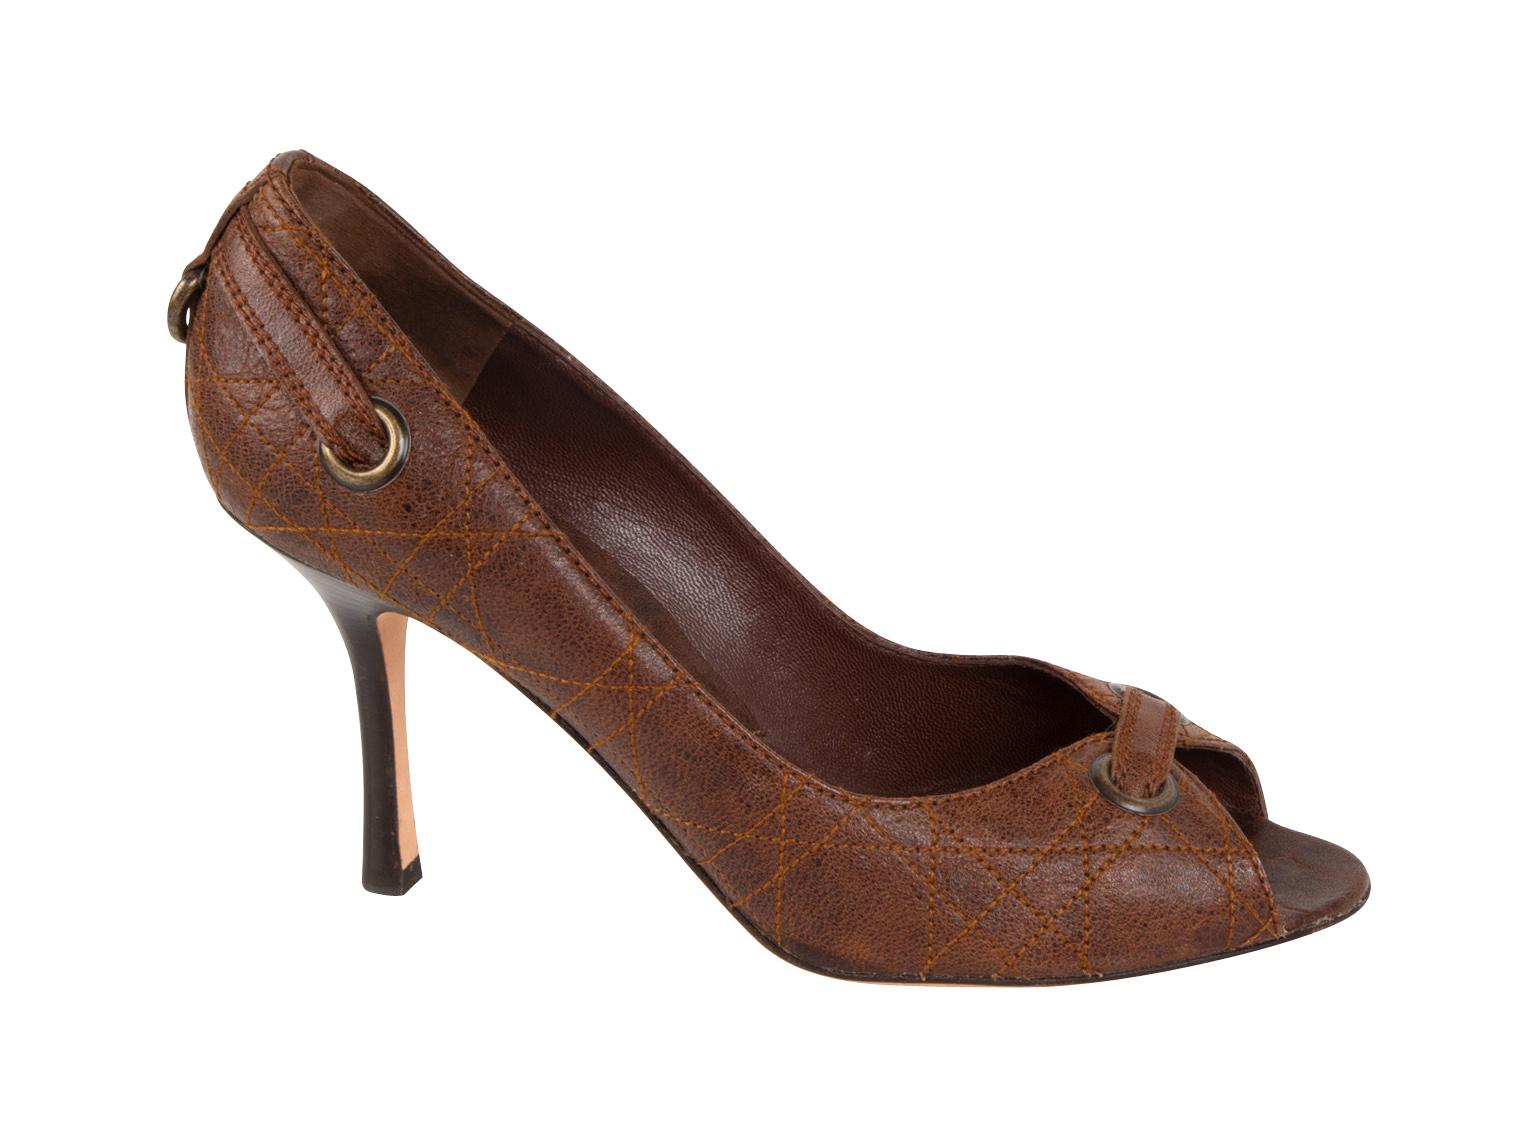 Guaranteed authentic Christian Dior open toe distressed leather pump. 
Open toe pump in distressed brown leather with top stitch detail that gives quilted effect. 
Antiqued brass grommets accentuate the front and rear of the shoe. 
High wood stacked